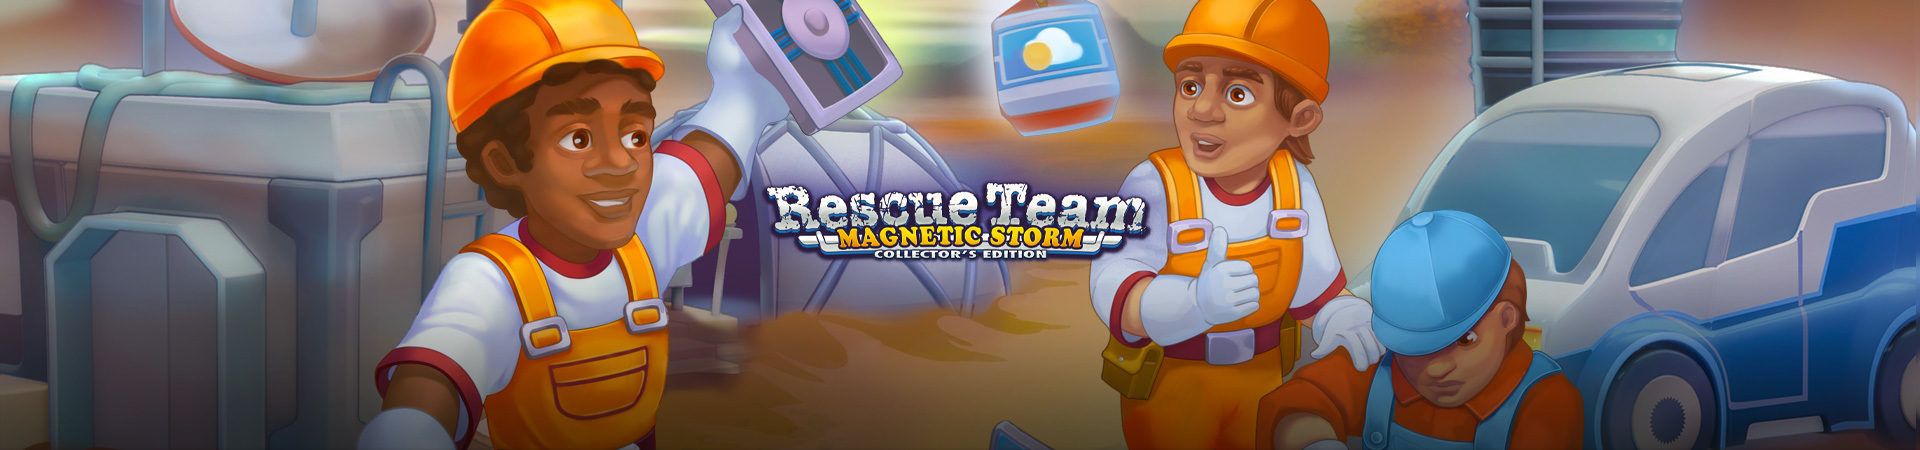 Rescue Team 14: Magnetic Storm CE